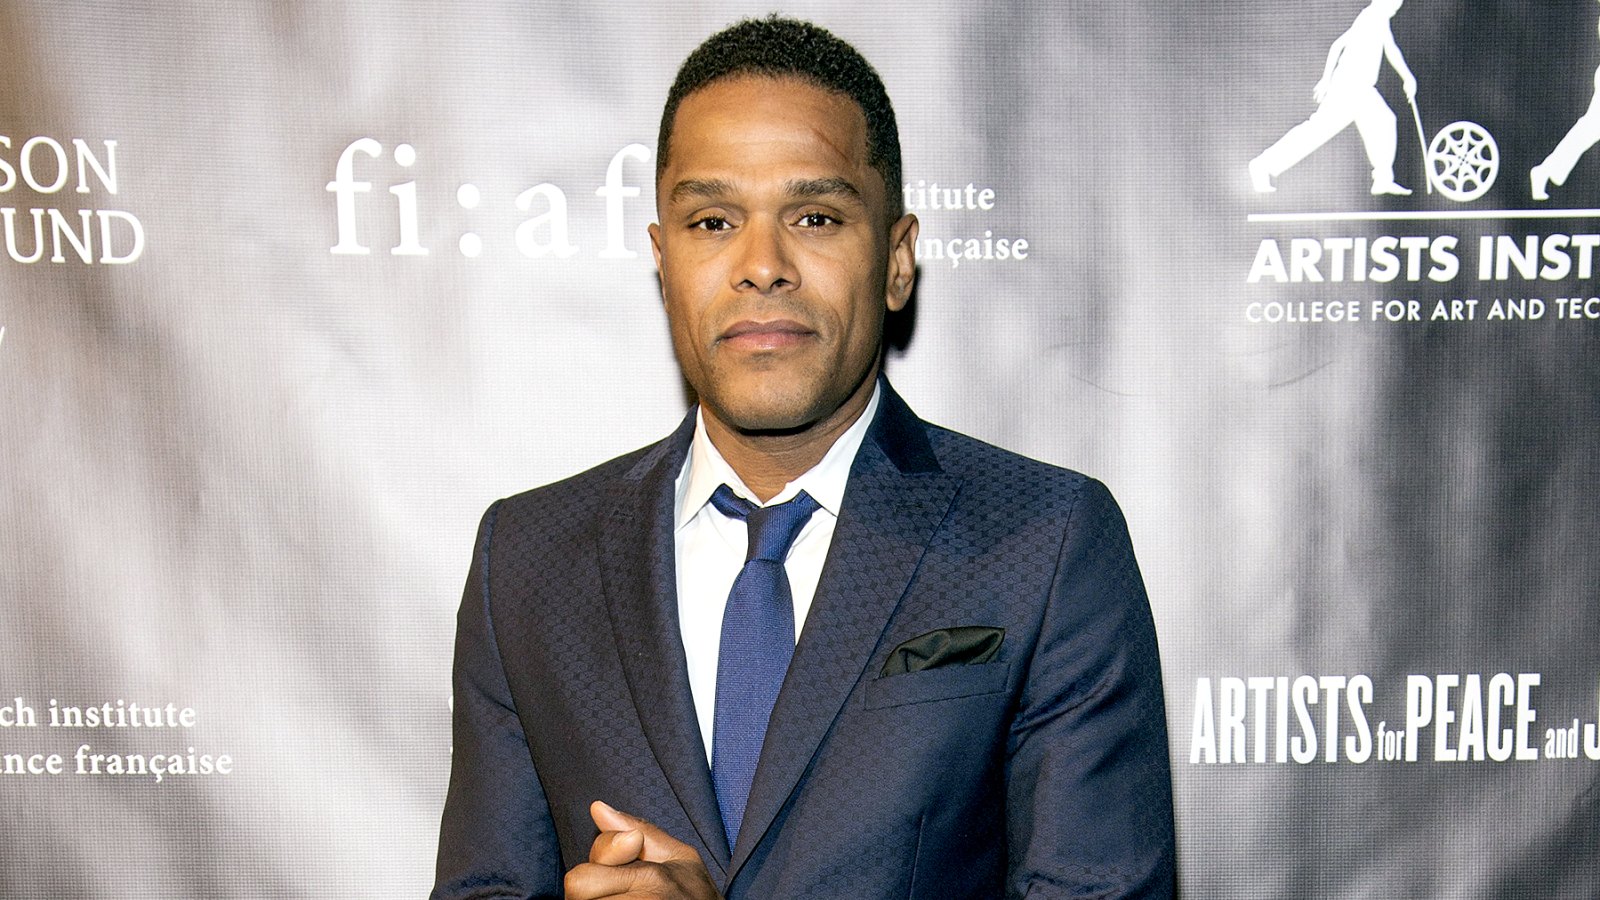 Grammy award winning musician Maxwell attends the French Institute Alliance Franaise and Artists for Peace and Justice "Haiti Optimiste" event at Florence Gould Hall on June 1, 2016 in New York City.